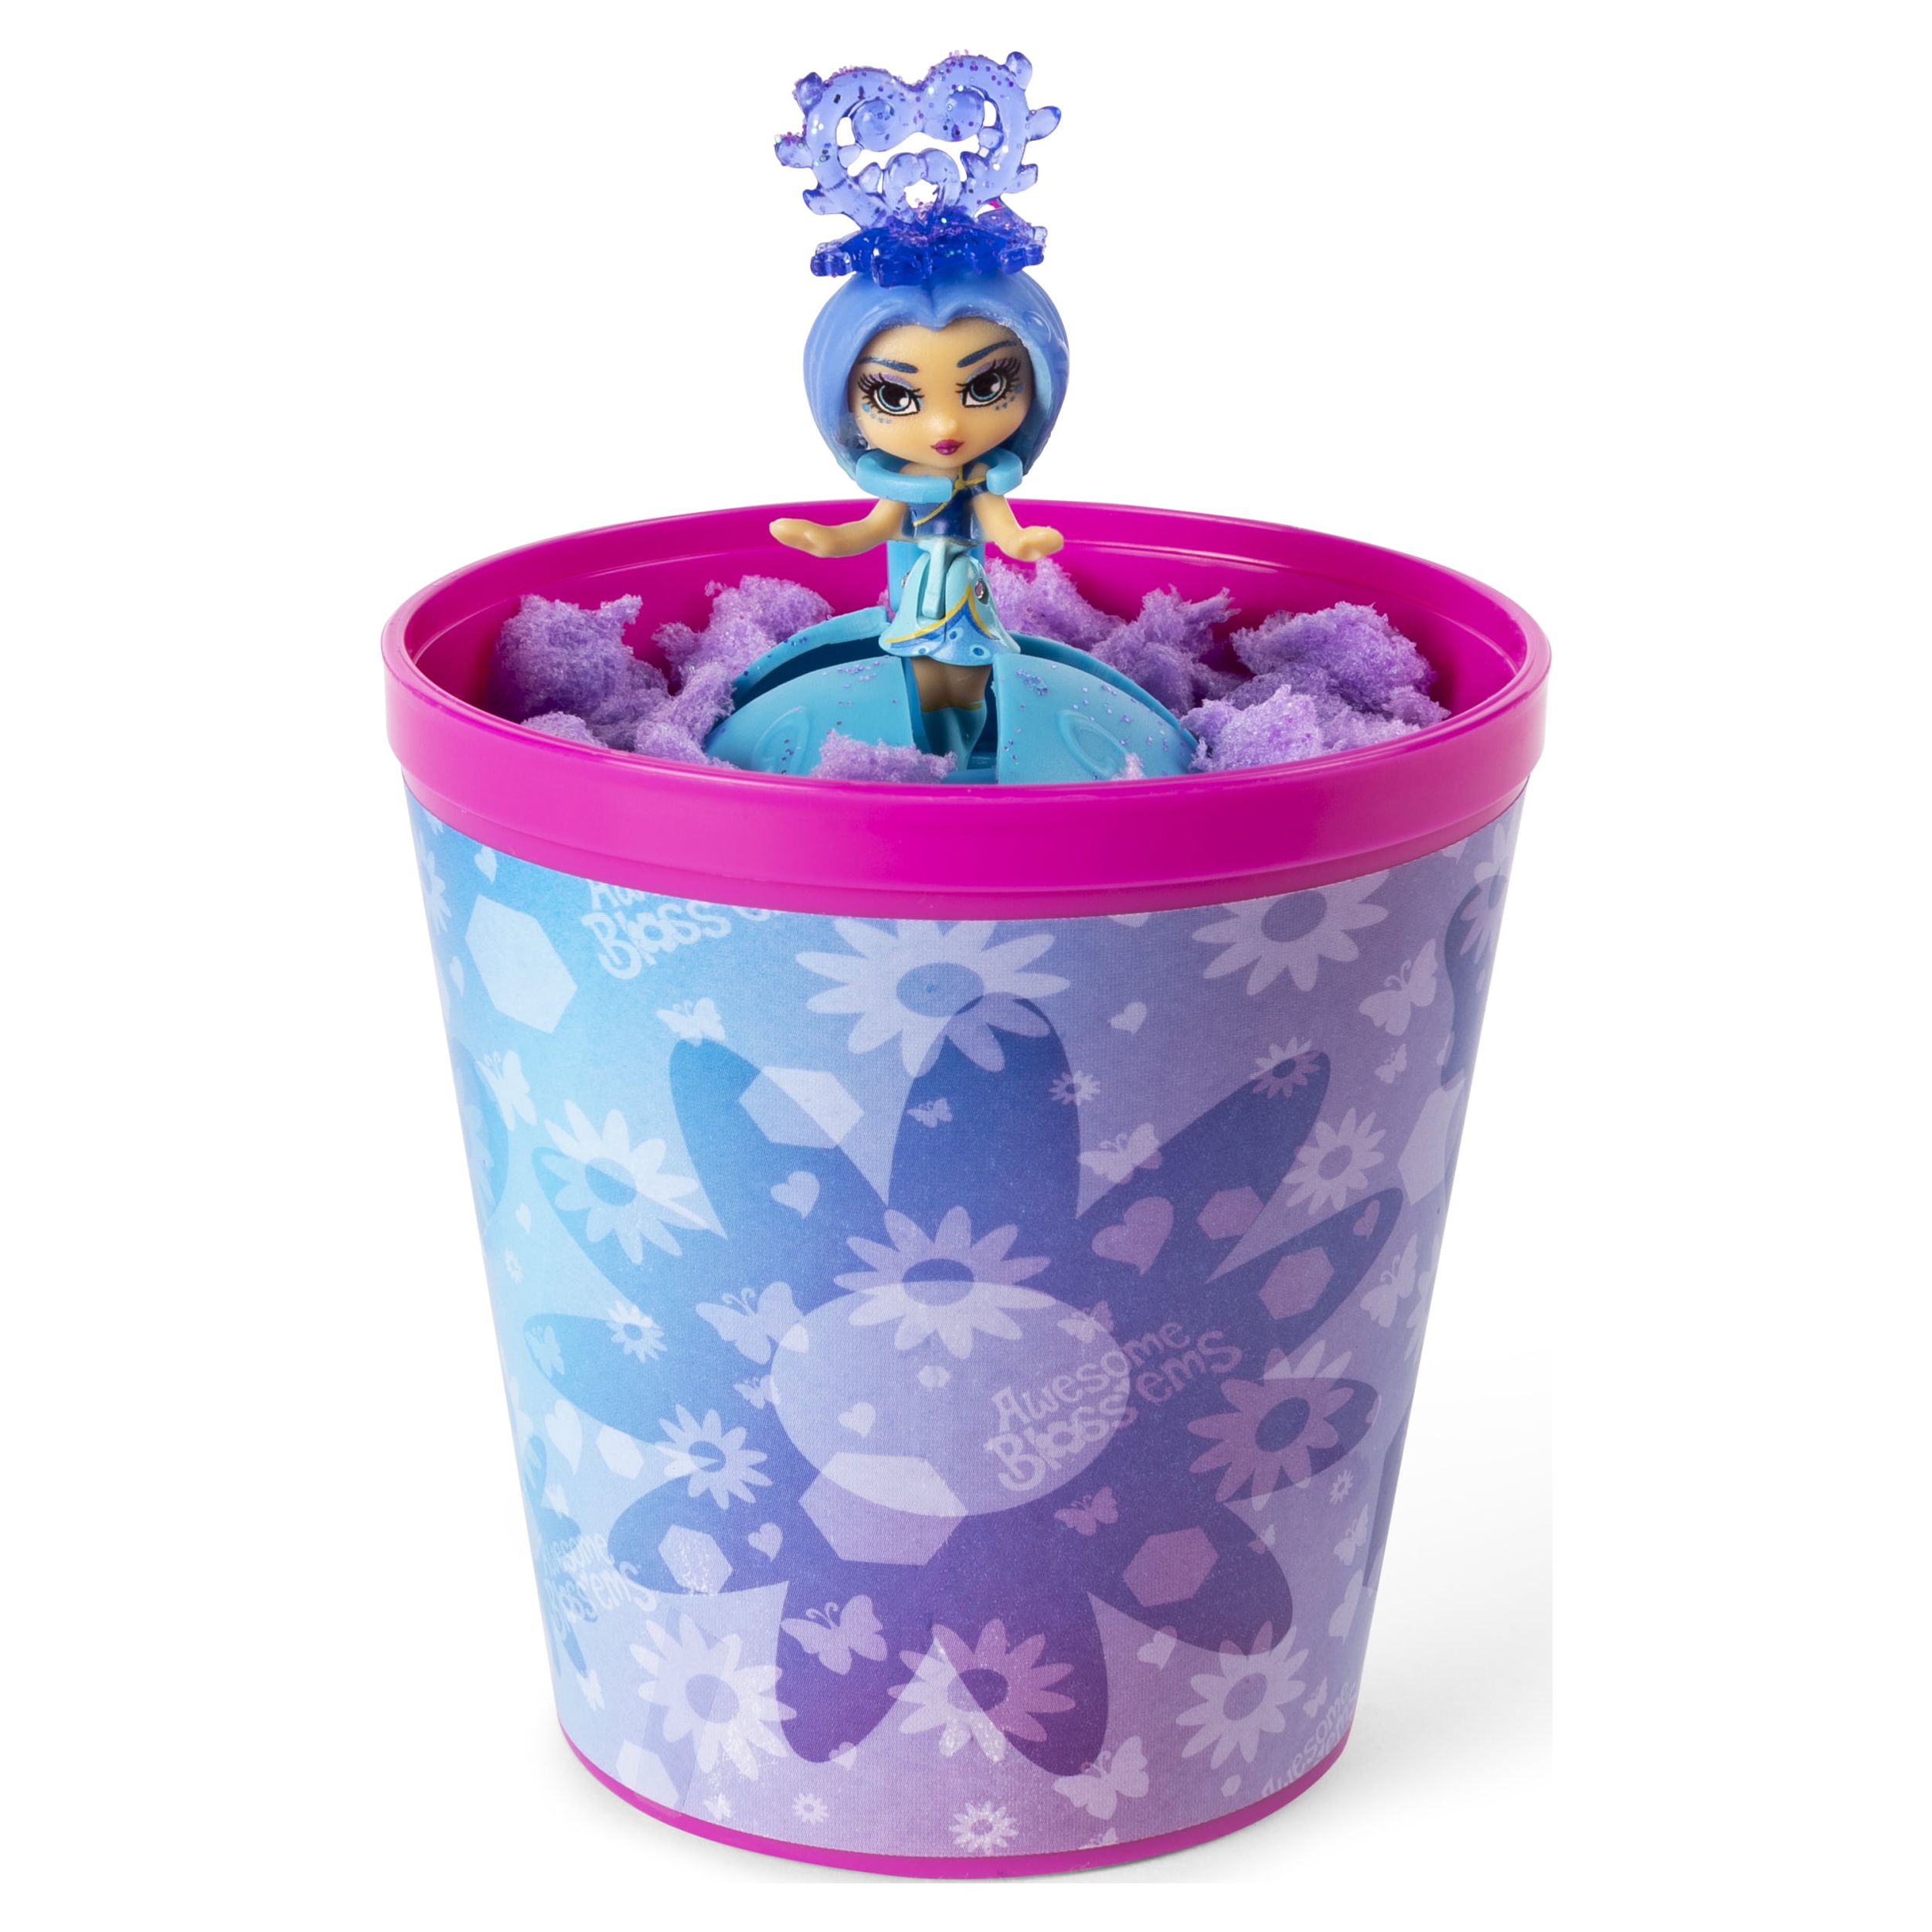 Awesome Bloss’ems, Magical Growing Flower-Themed Scented Collectible Doll (Style May Vary) - image 8 of 8